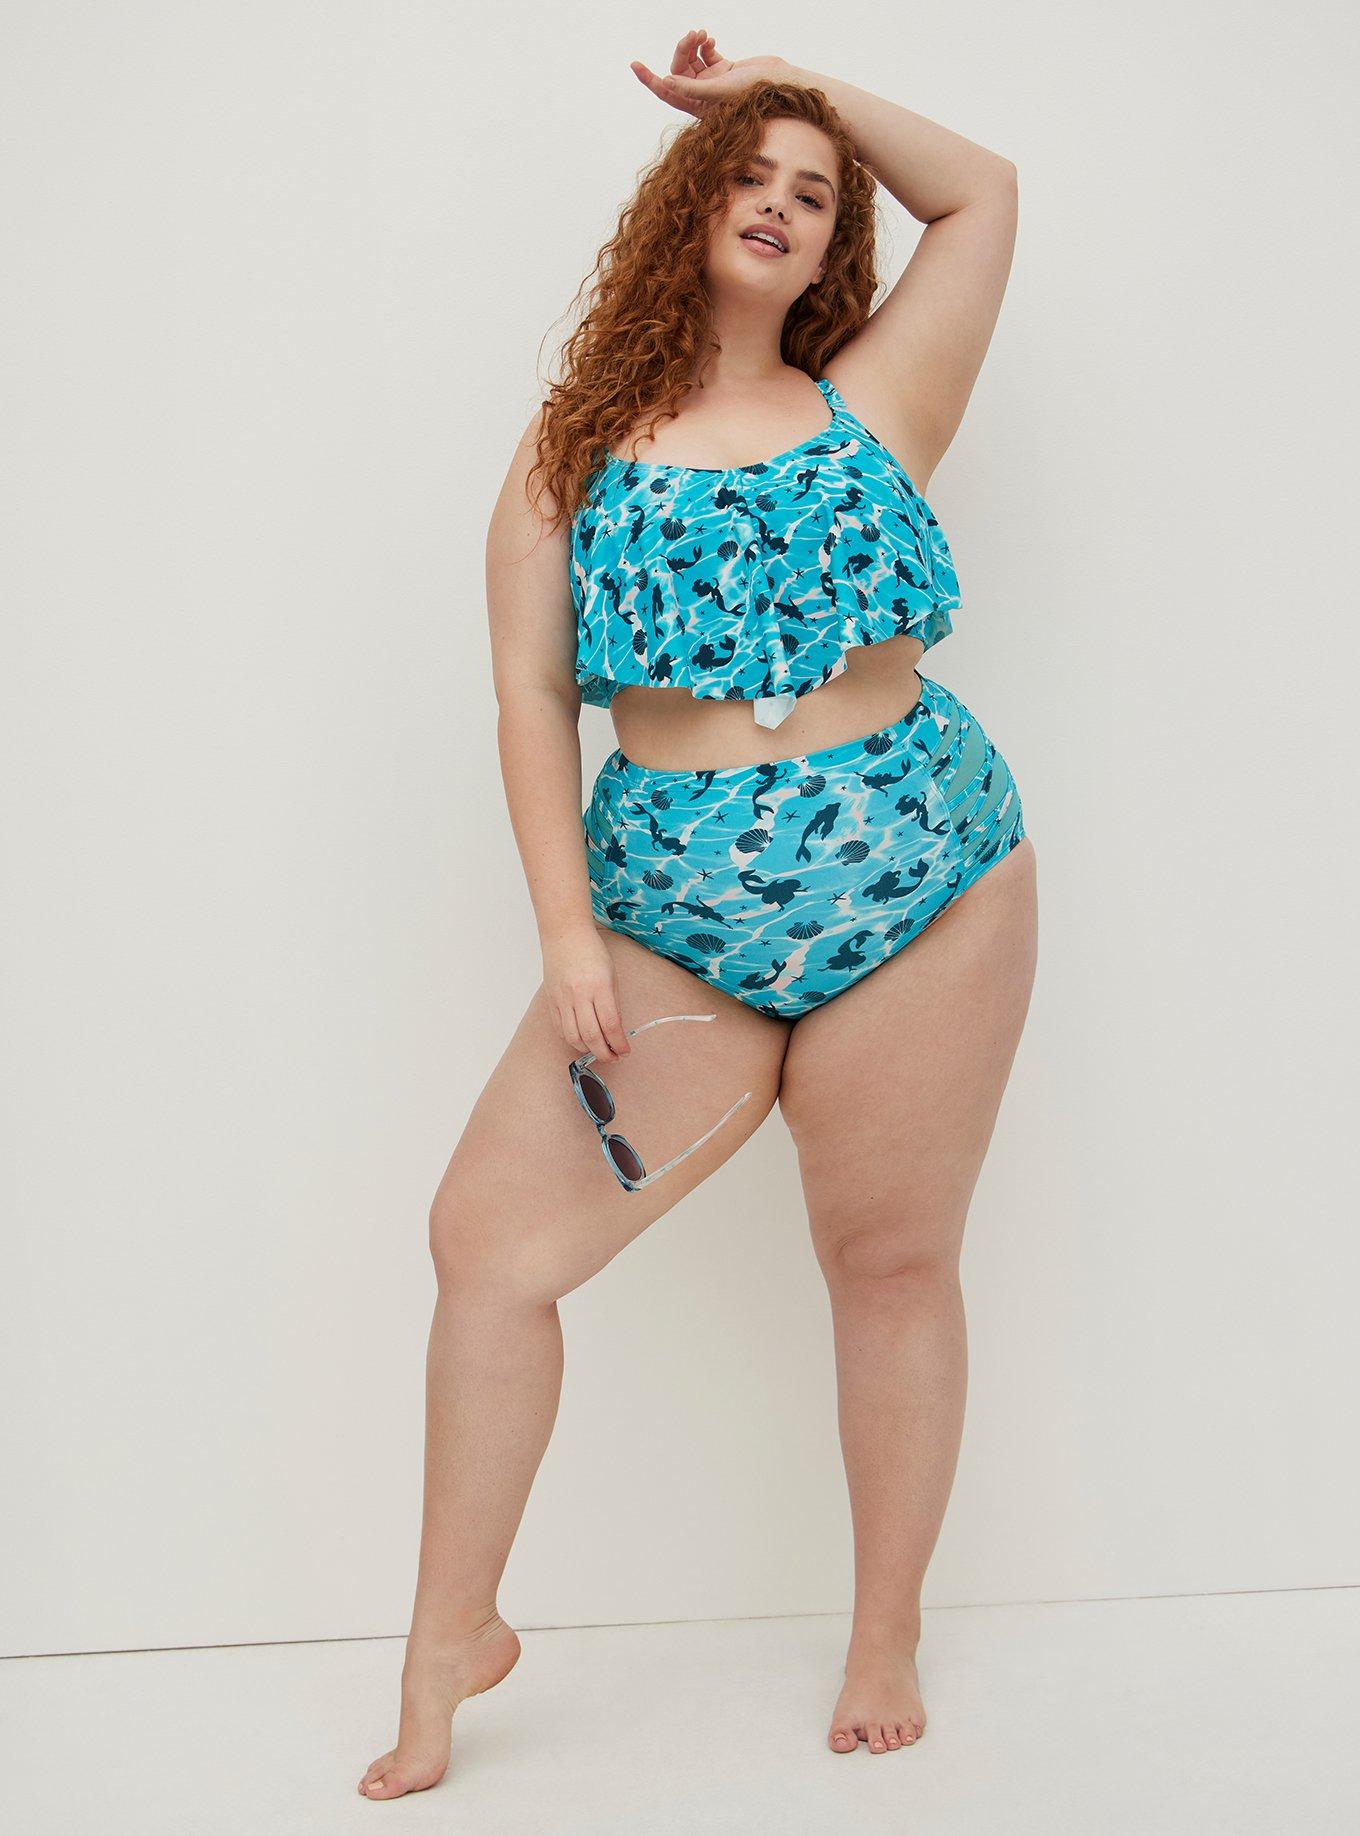 Pacific Vibes Teal Blue Sparkly Side-Tie Bikini Bottoms